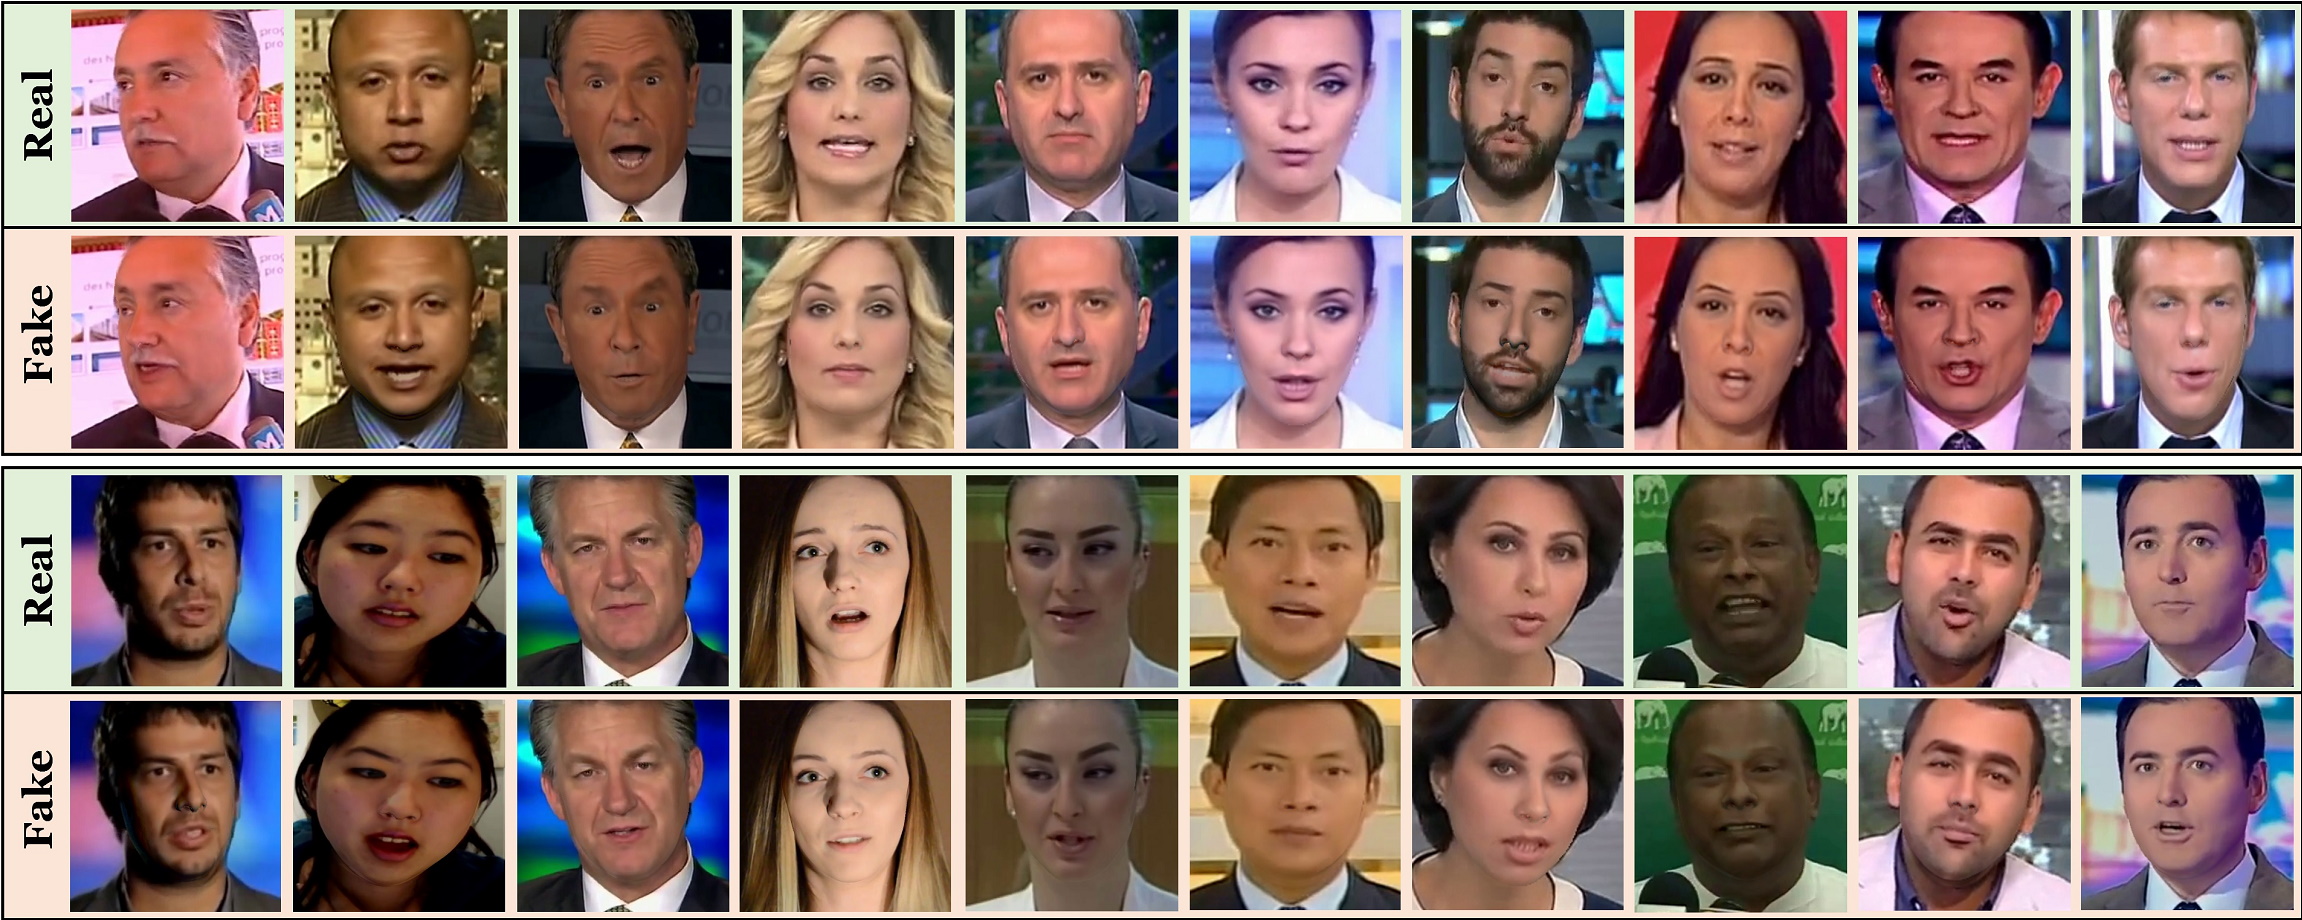 FaceForensics: A Large-scale Video Dataset for Forgery Detection in Human Faces